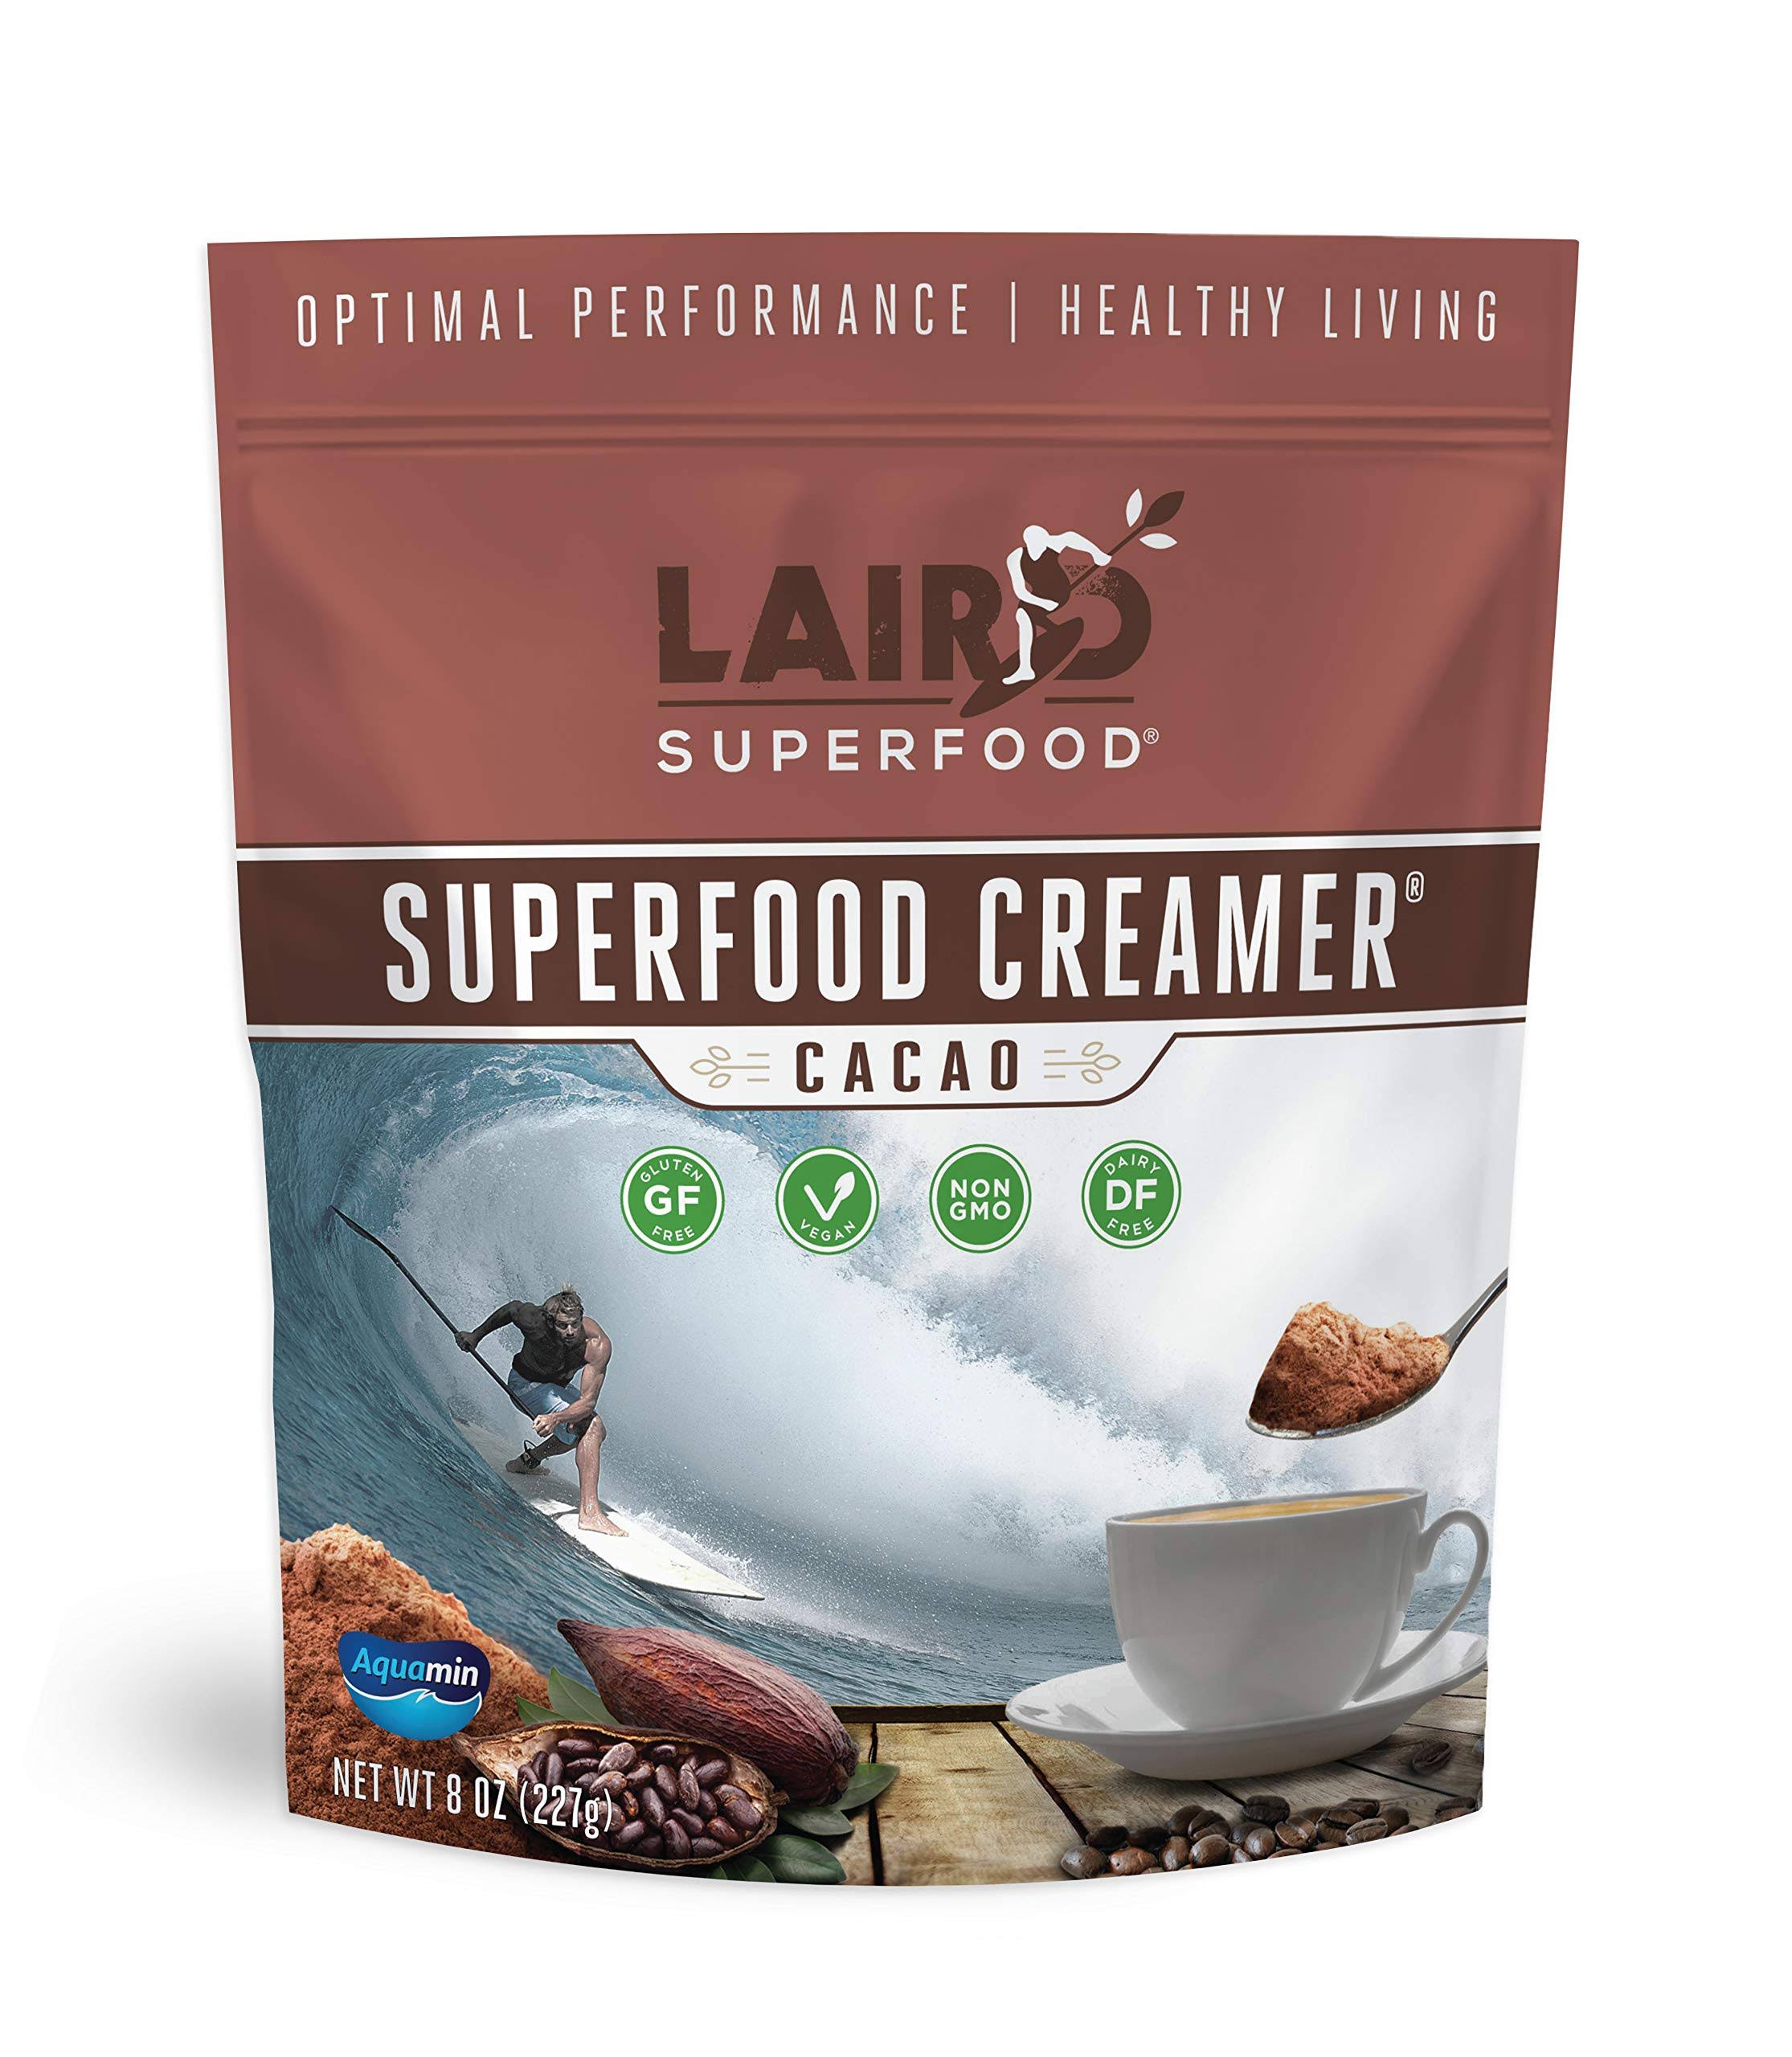 Laird Superfood Creamer - Cacao, 8oz